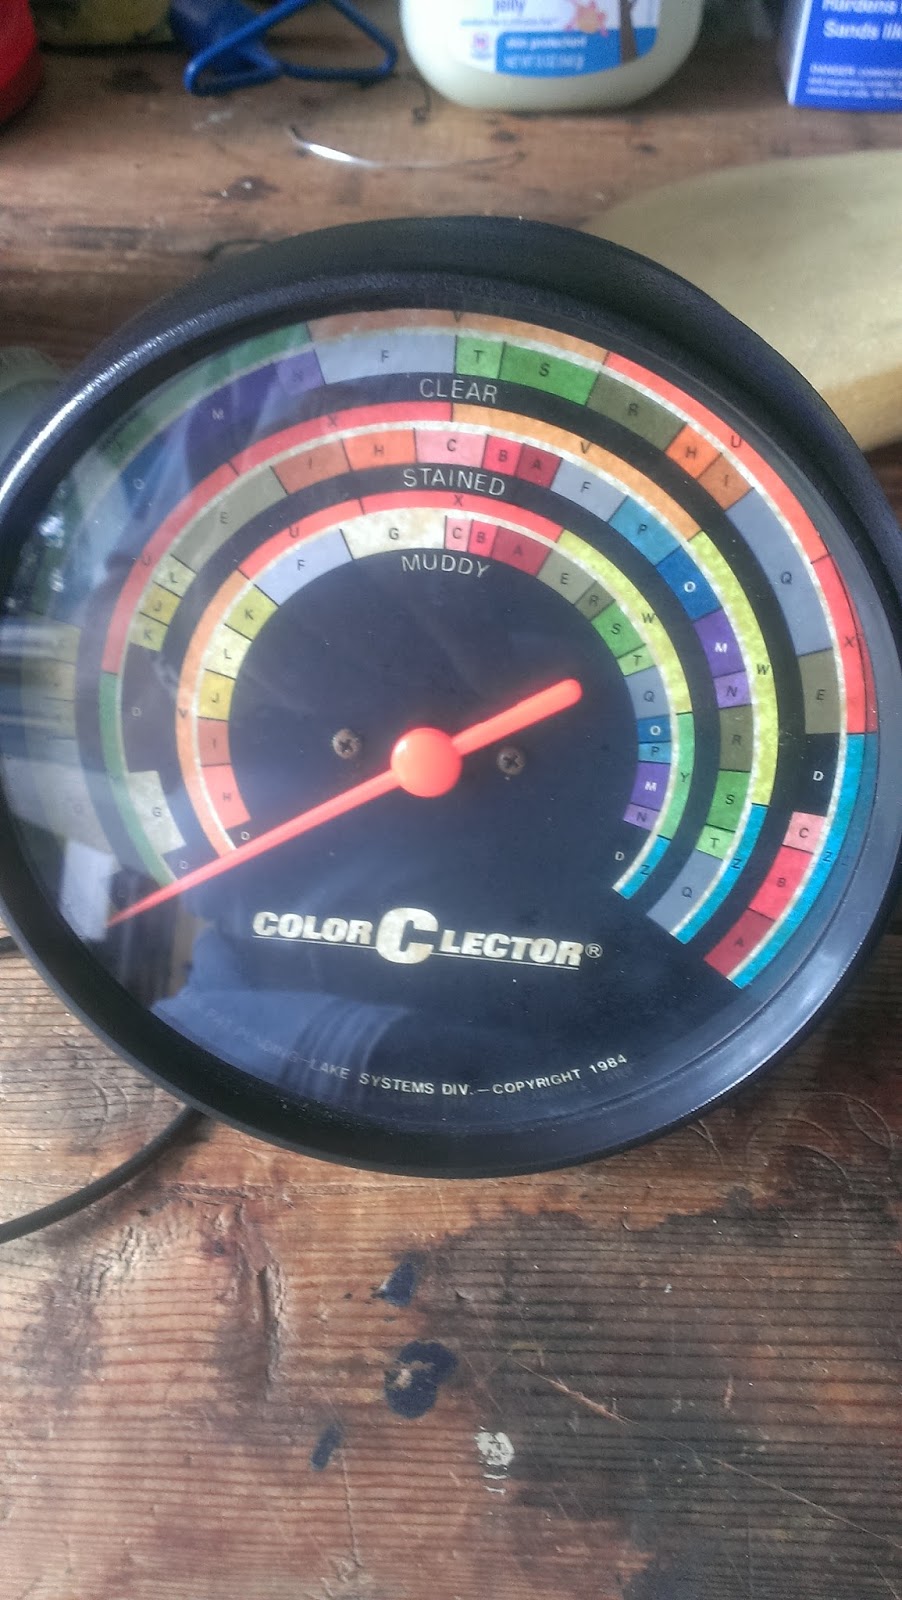 Color C Lector Chart